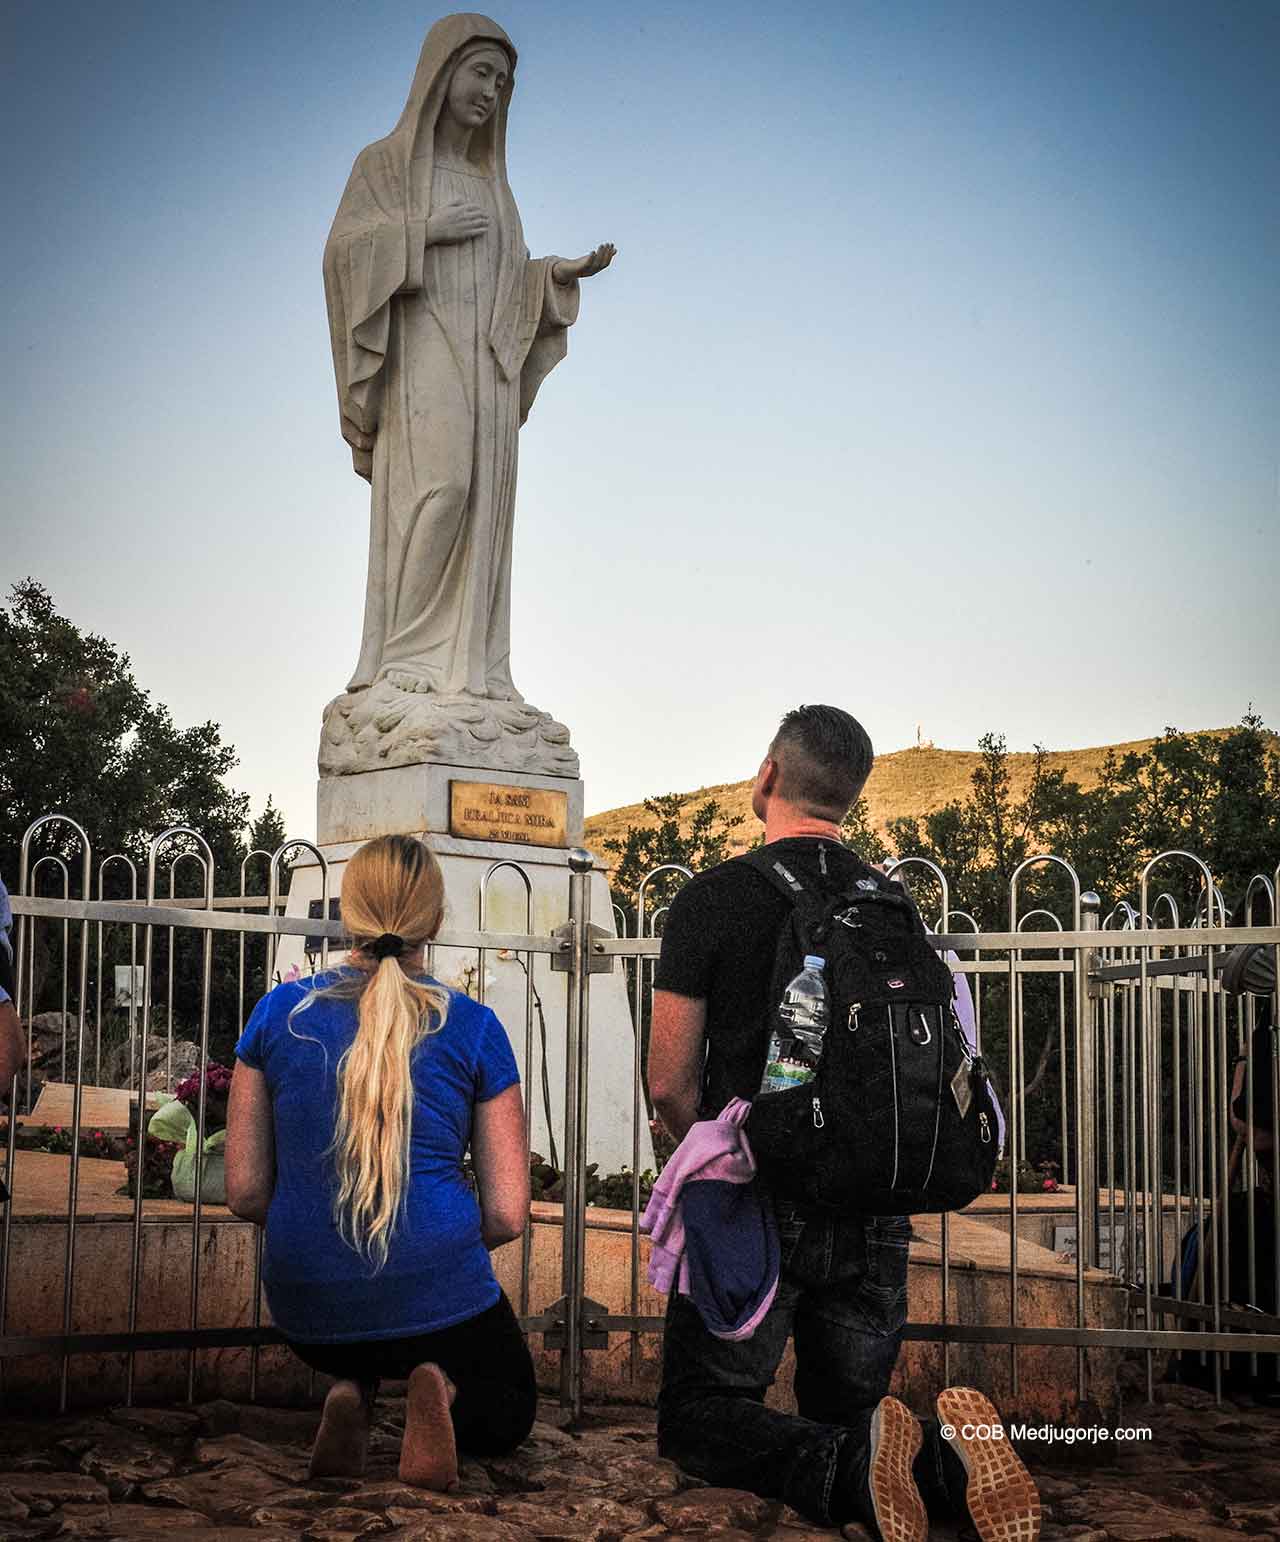 A Family praying on Apparition Mountain in Medjugorje, July 2018